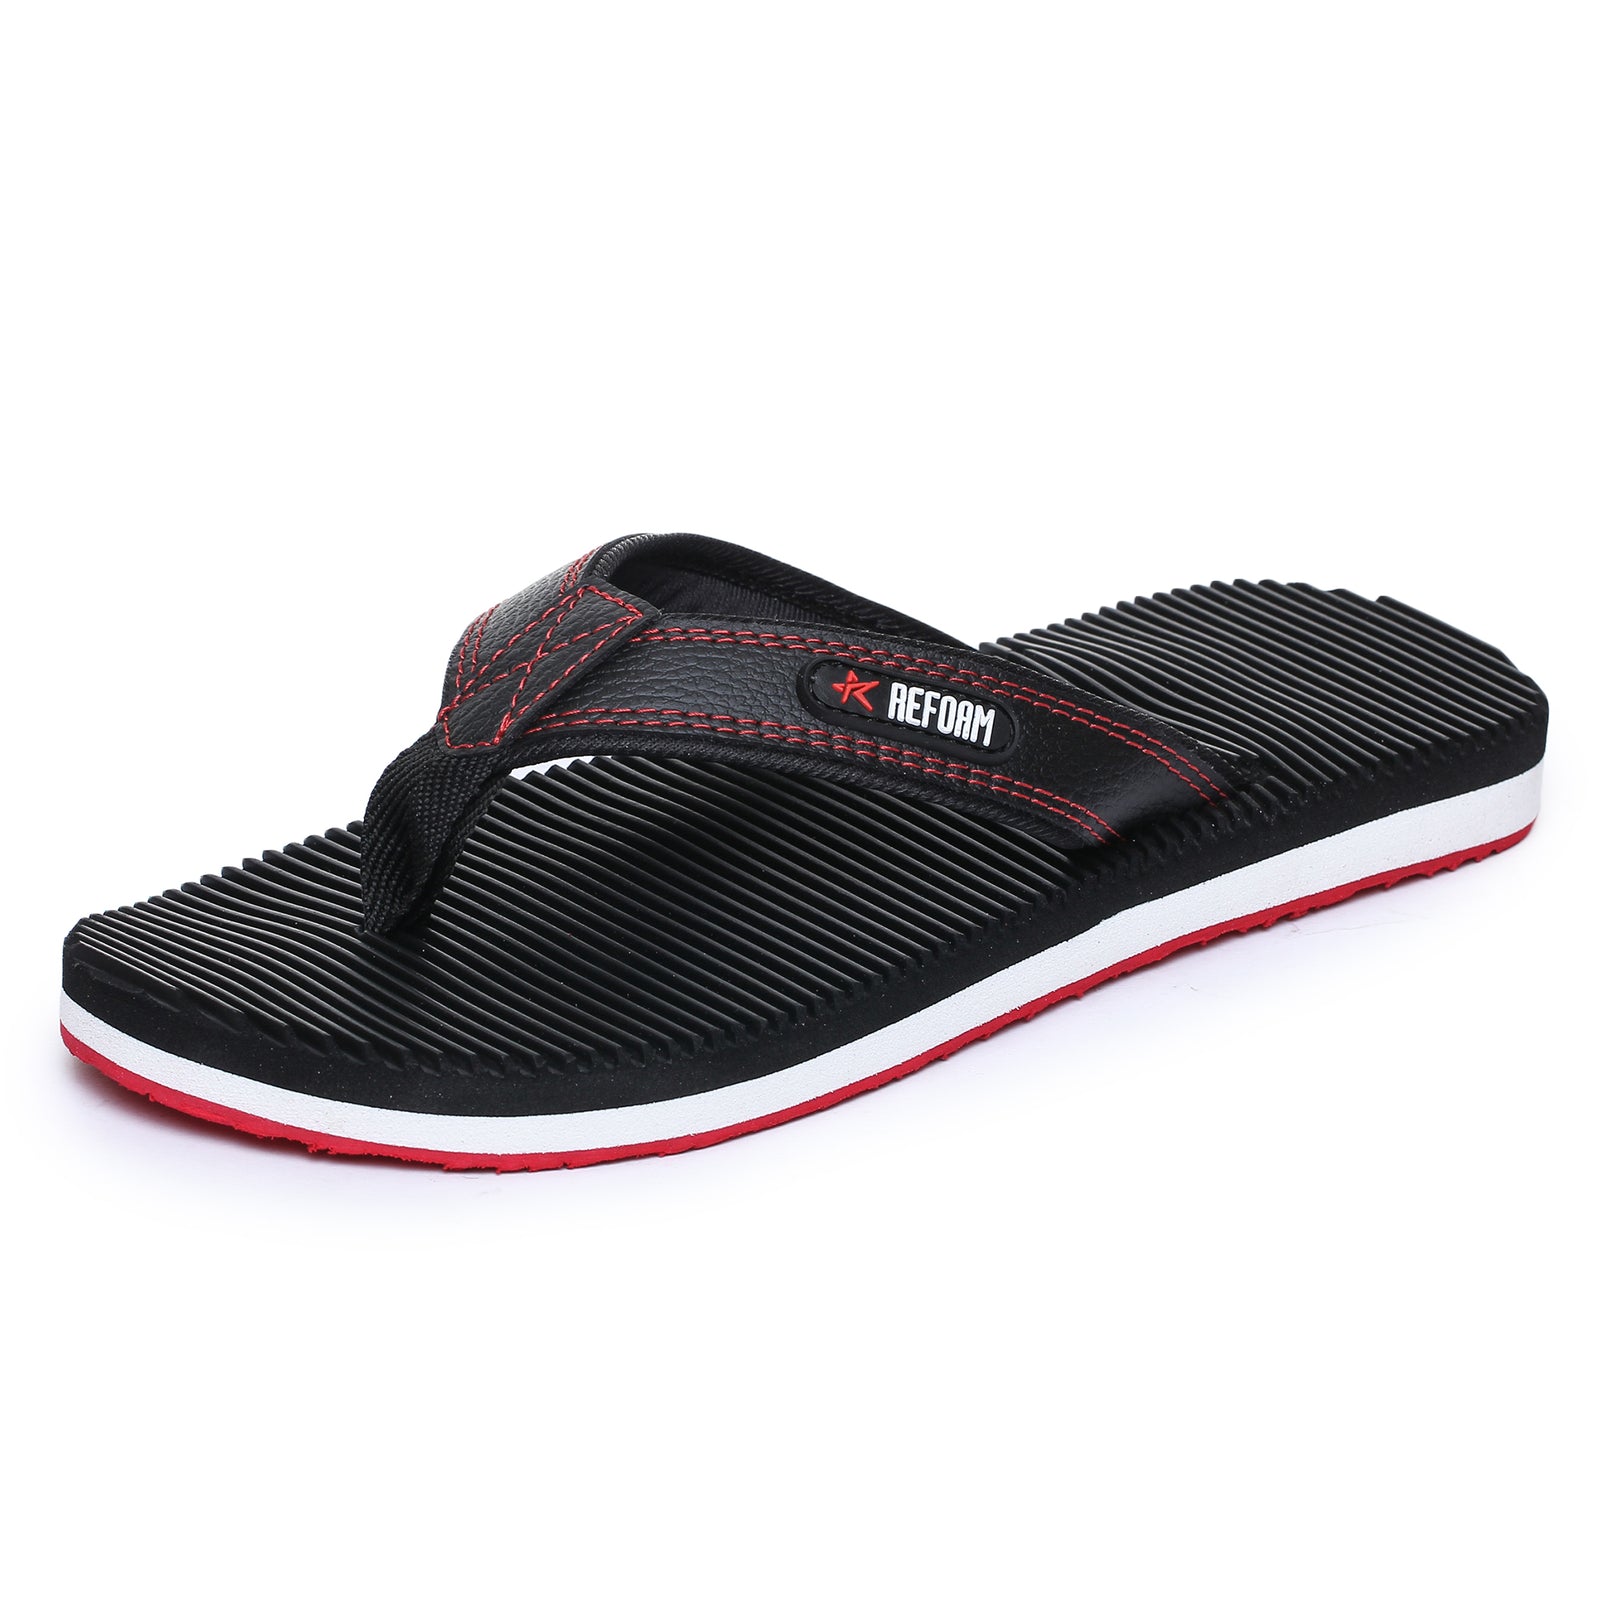 Black Solid Fabric Slip On Casual Slippers For Men